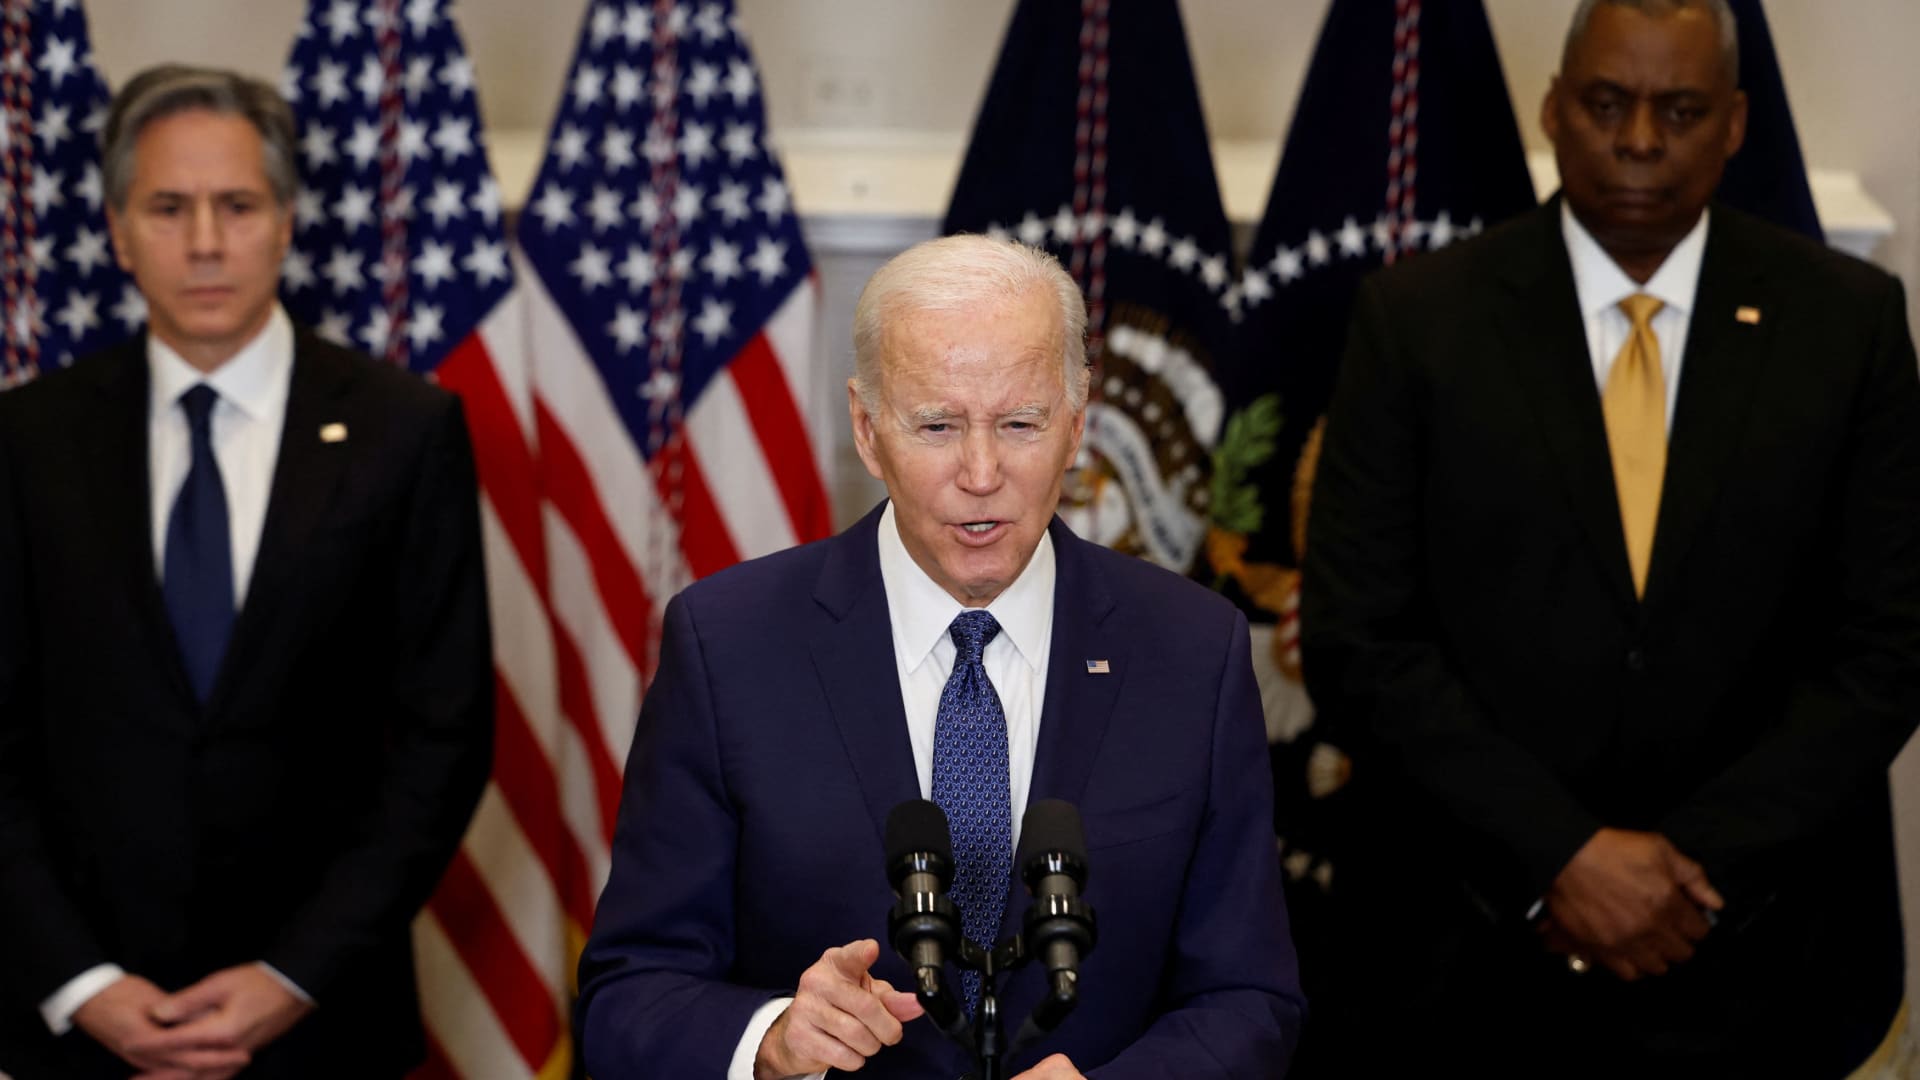 Biden touts job growth and slowing inflation rates in speech on economy